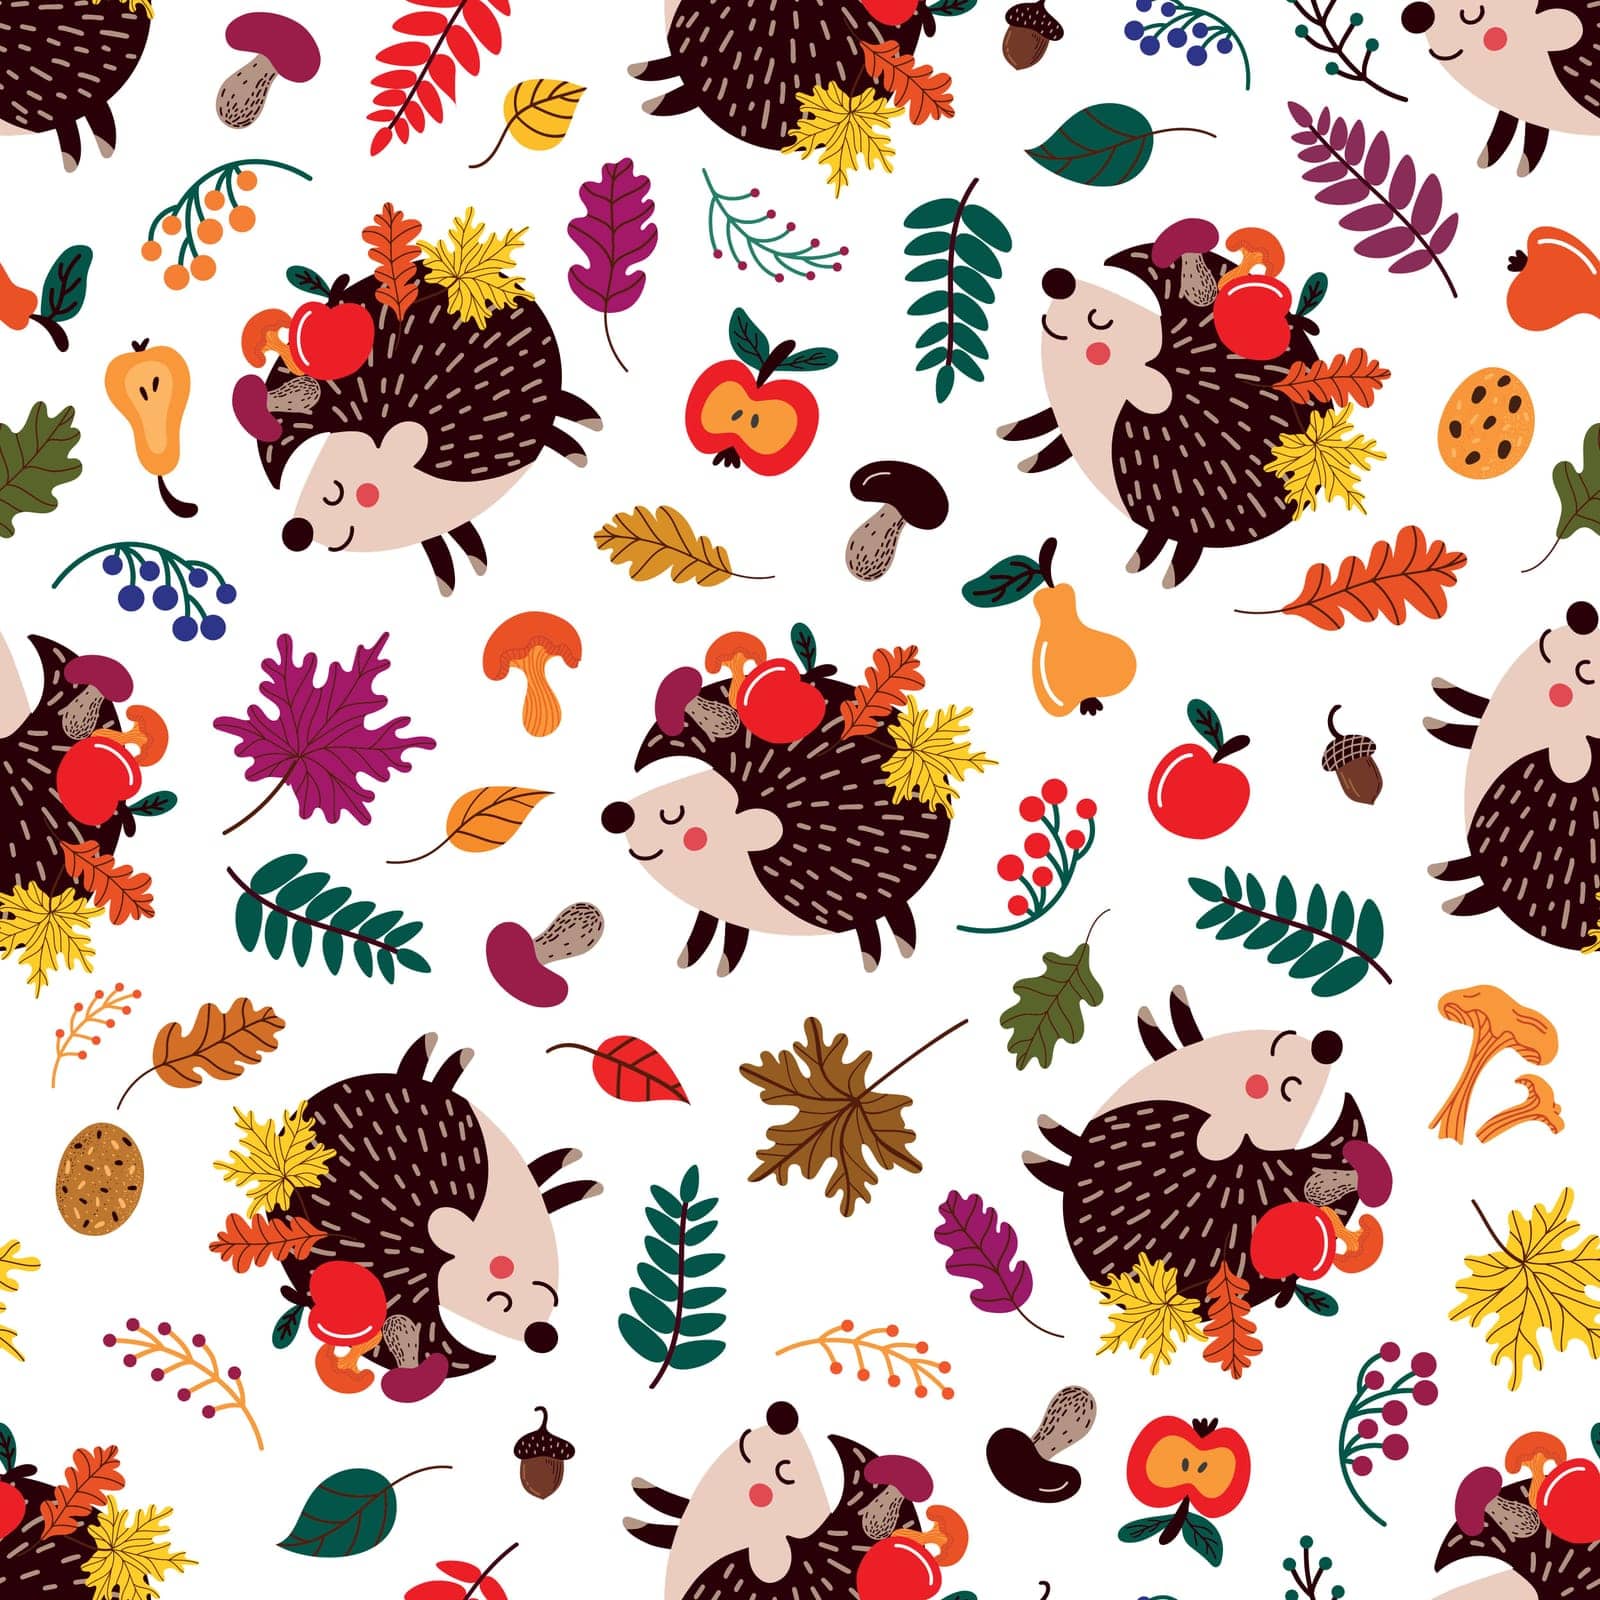 Background of cute cartoon hedgehogs among autumn leaves and fruits with mushrooms on white backdrop